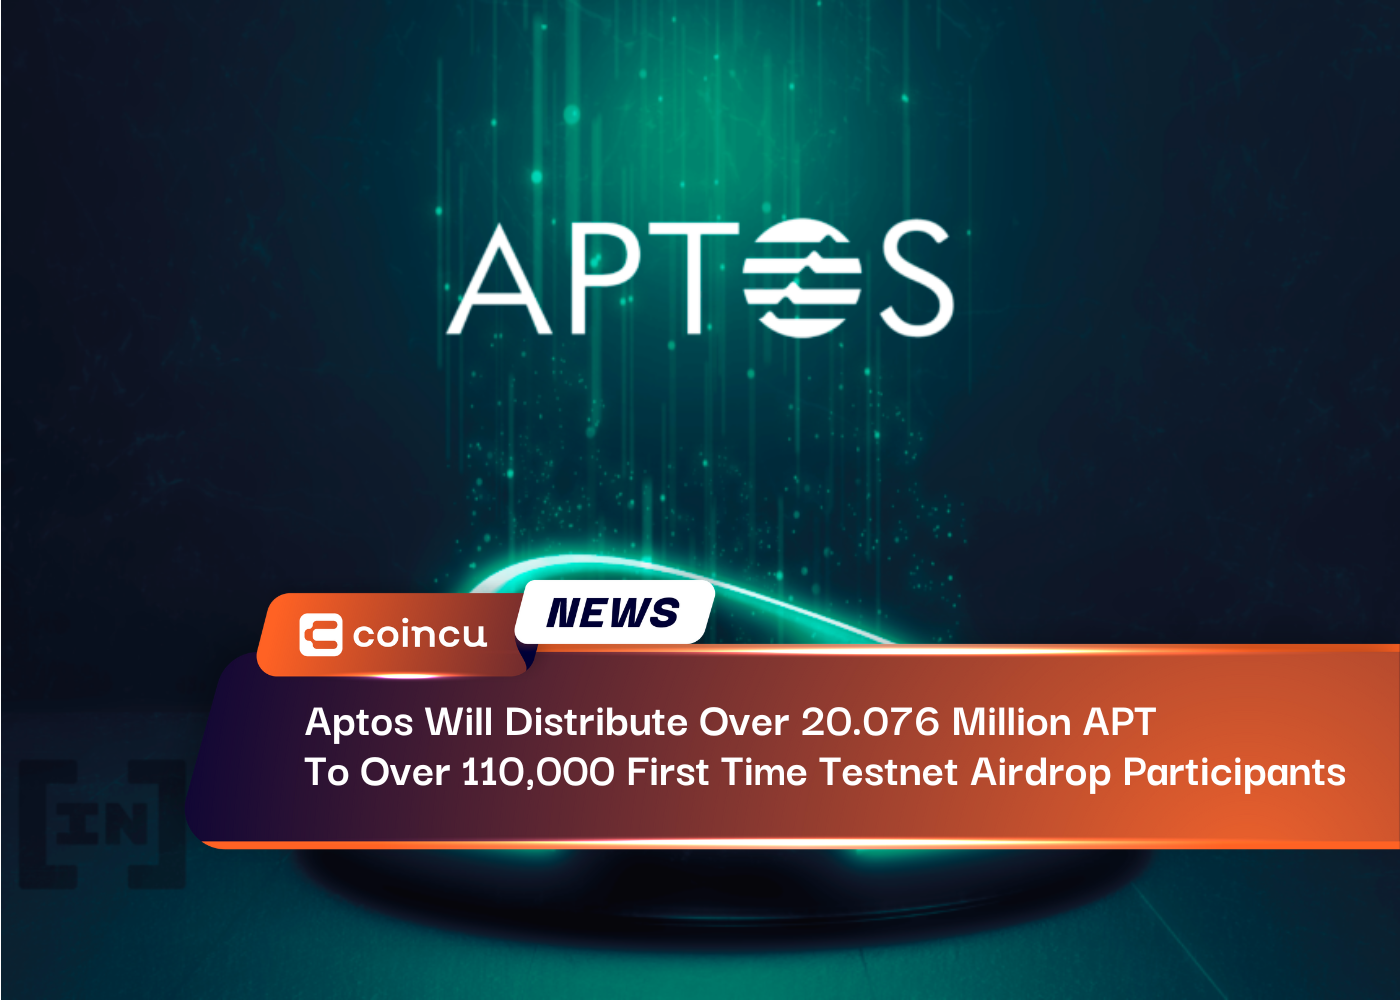 Aptos Will Distribute Over 20.076 Million APT to Over 110,000 First Time Testnet Airdrop Participants